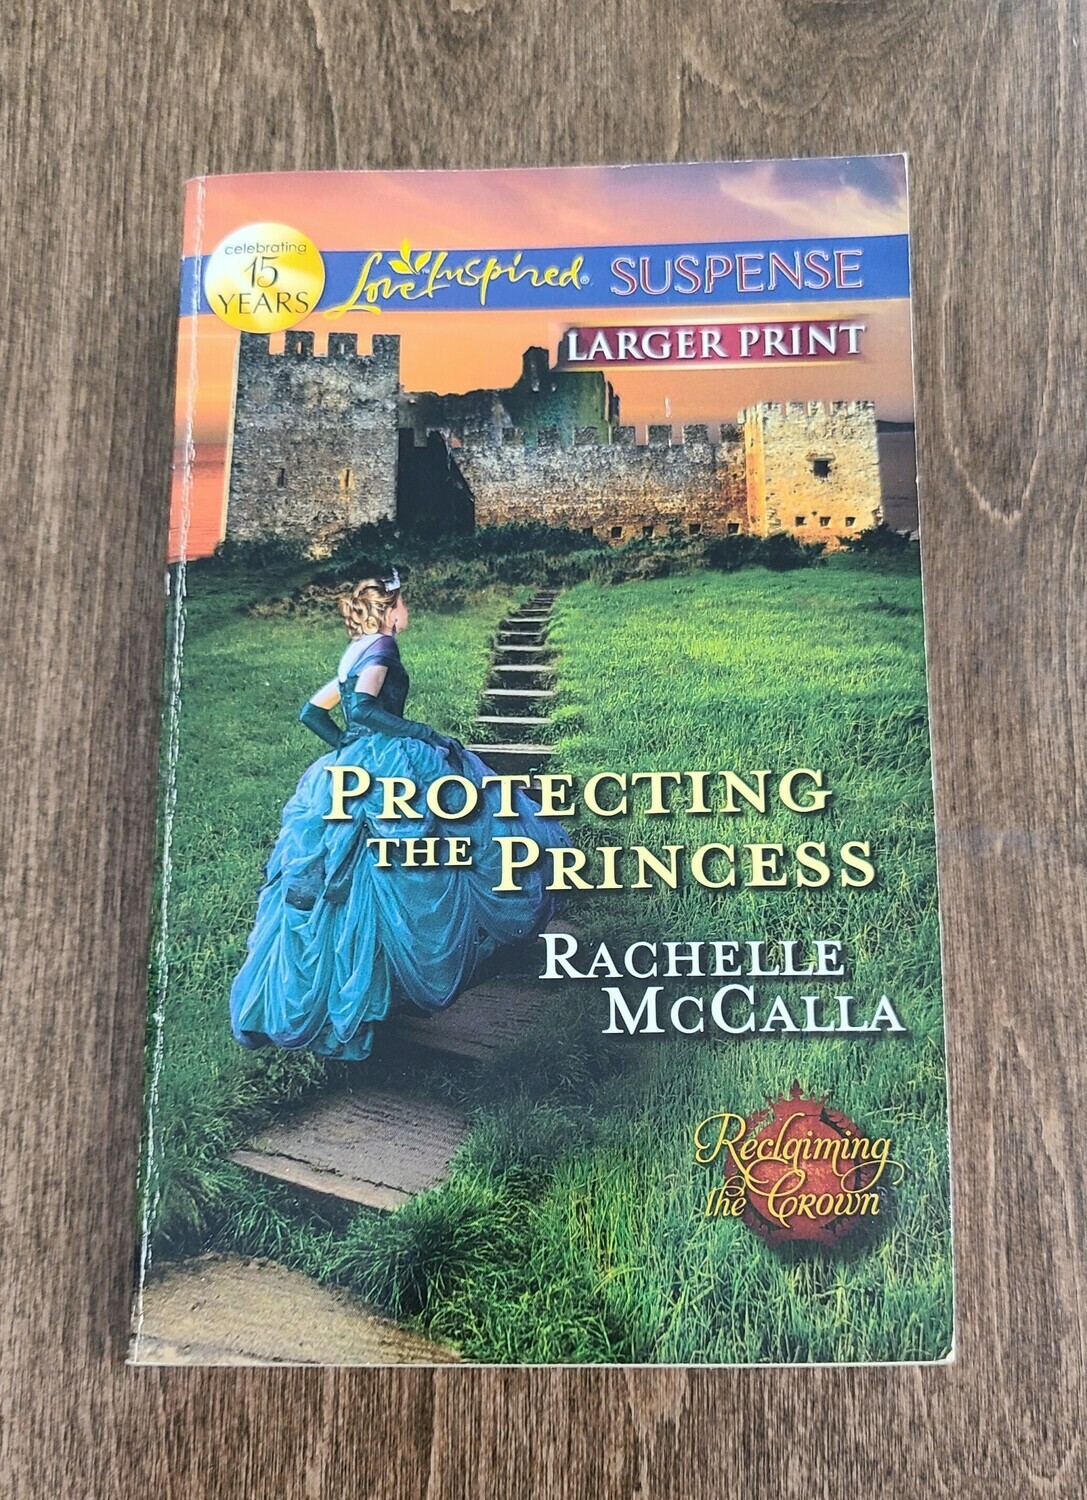 Protecting the Princess by Rachelle McCalla